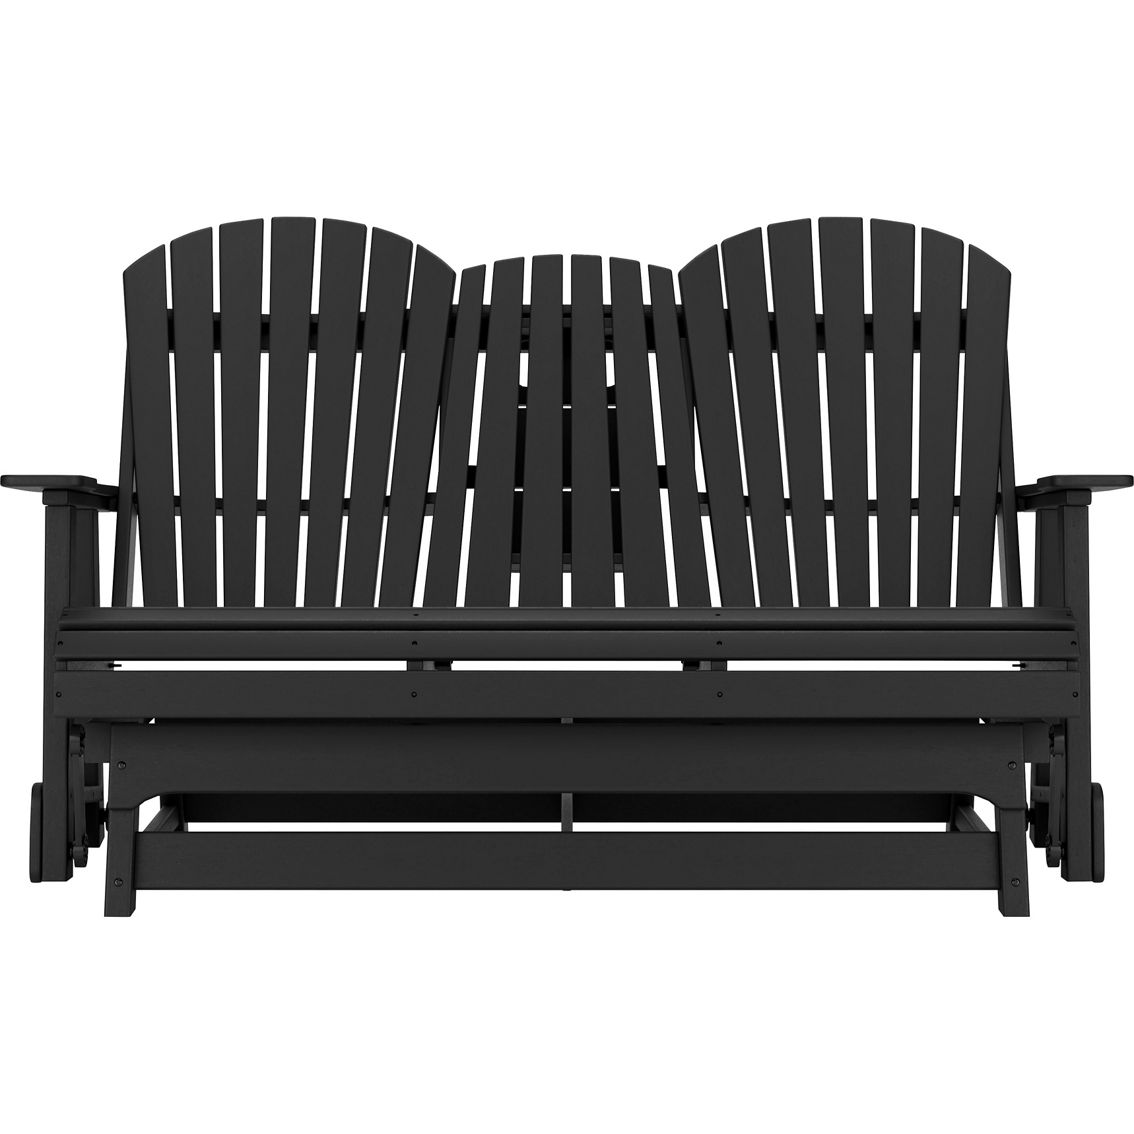 Signature Design by Ashley Hyland Wave Outdoor Glider Loveseat - Image 2 of 7